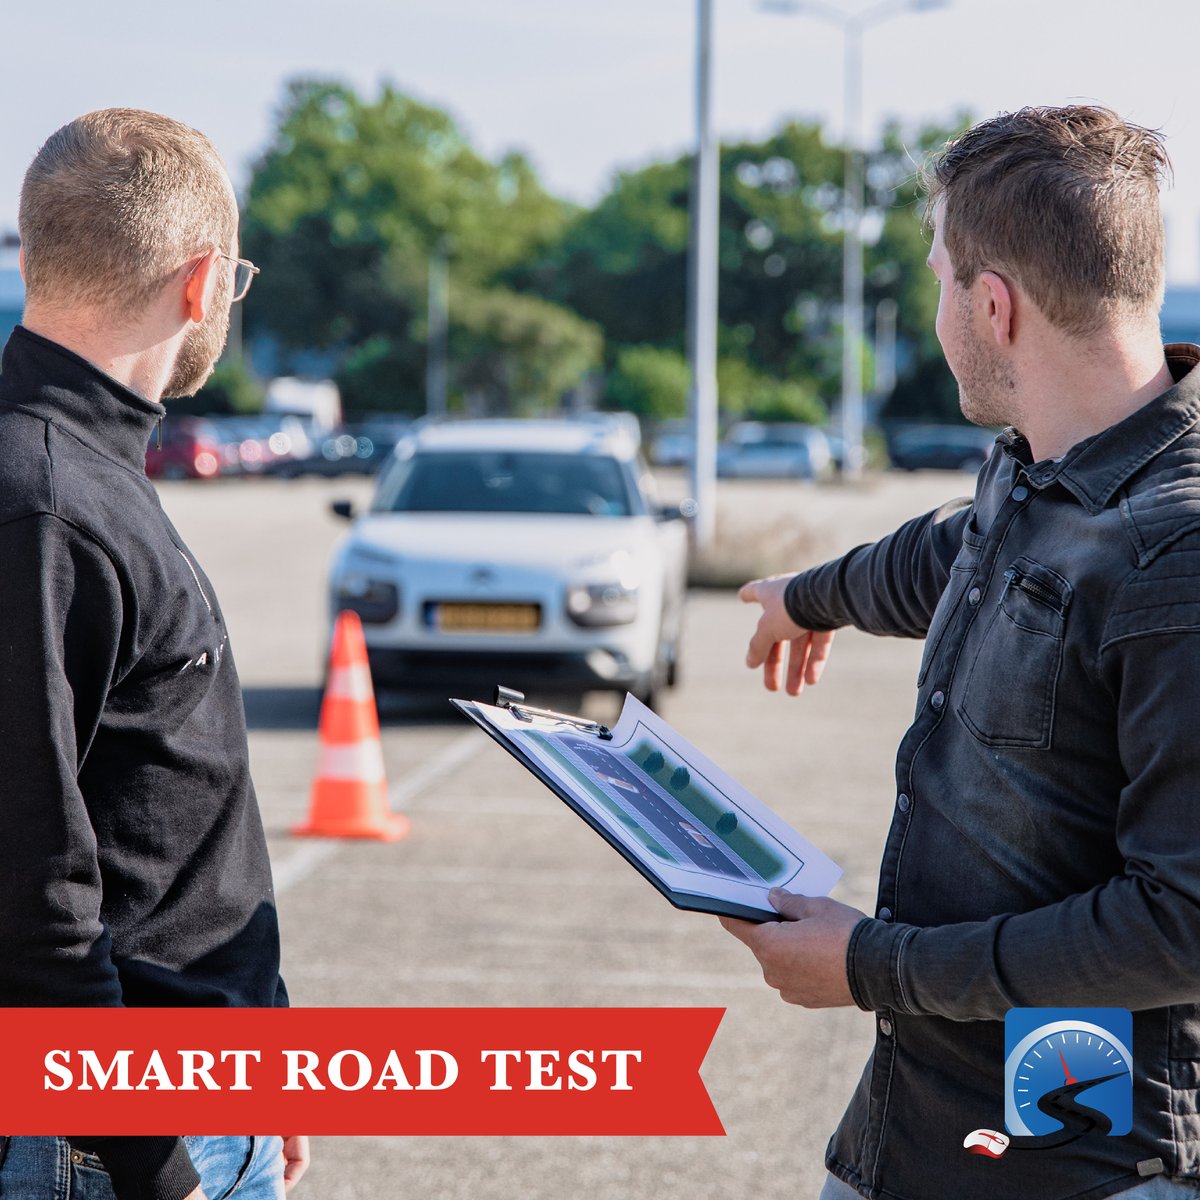 DRIVER'S TEST CHECKLIST

Get your DON'T FAIL Your Driver's Test checklist here: smartdrivetest.com/pass-drivers-t…

TO PASS: You must demonstrate that you have due care and control of the vehicle in changing road & traffic conditions.

#drivingtest #drivingtesttips #defensivedriving